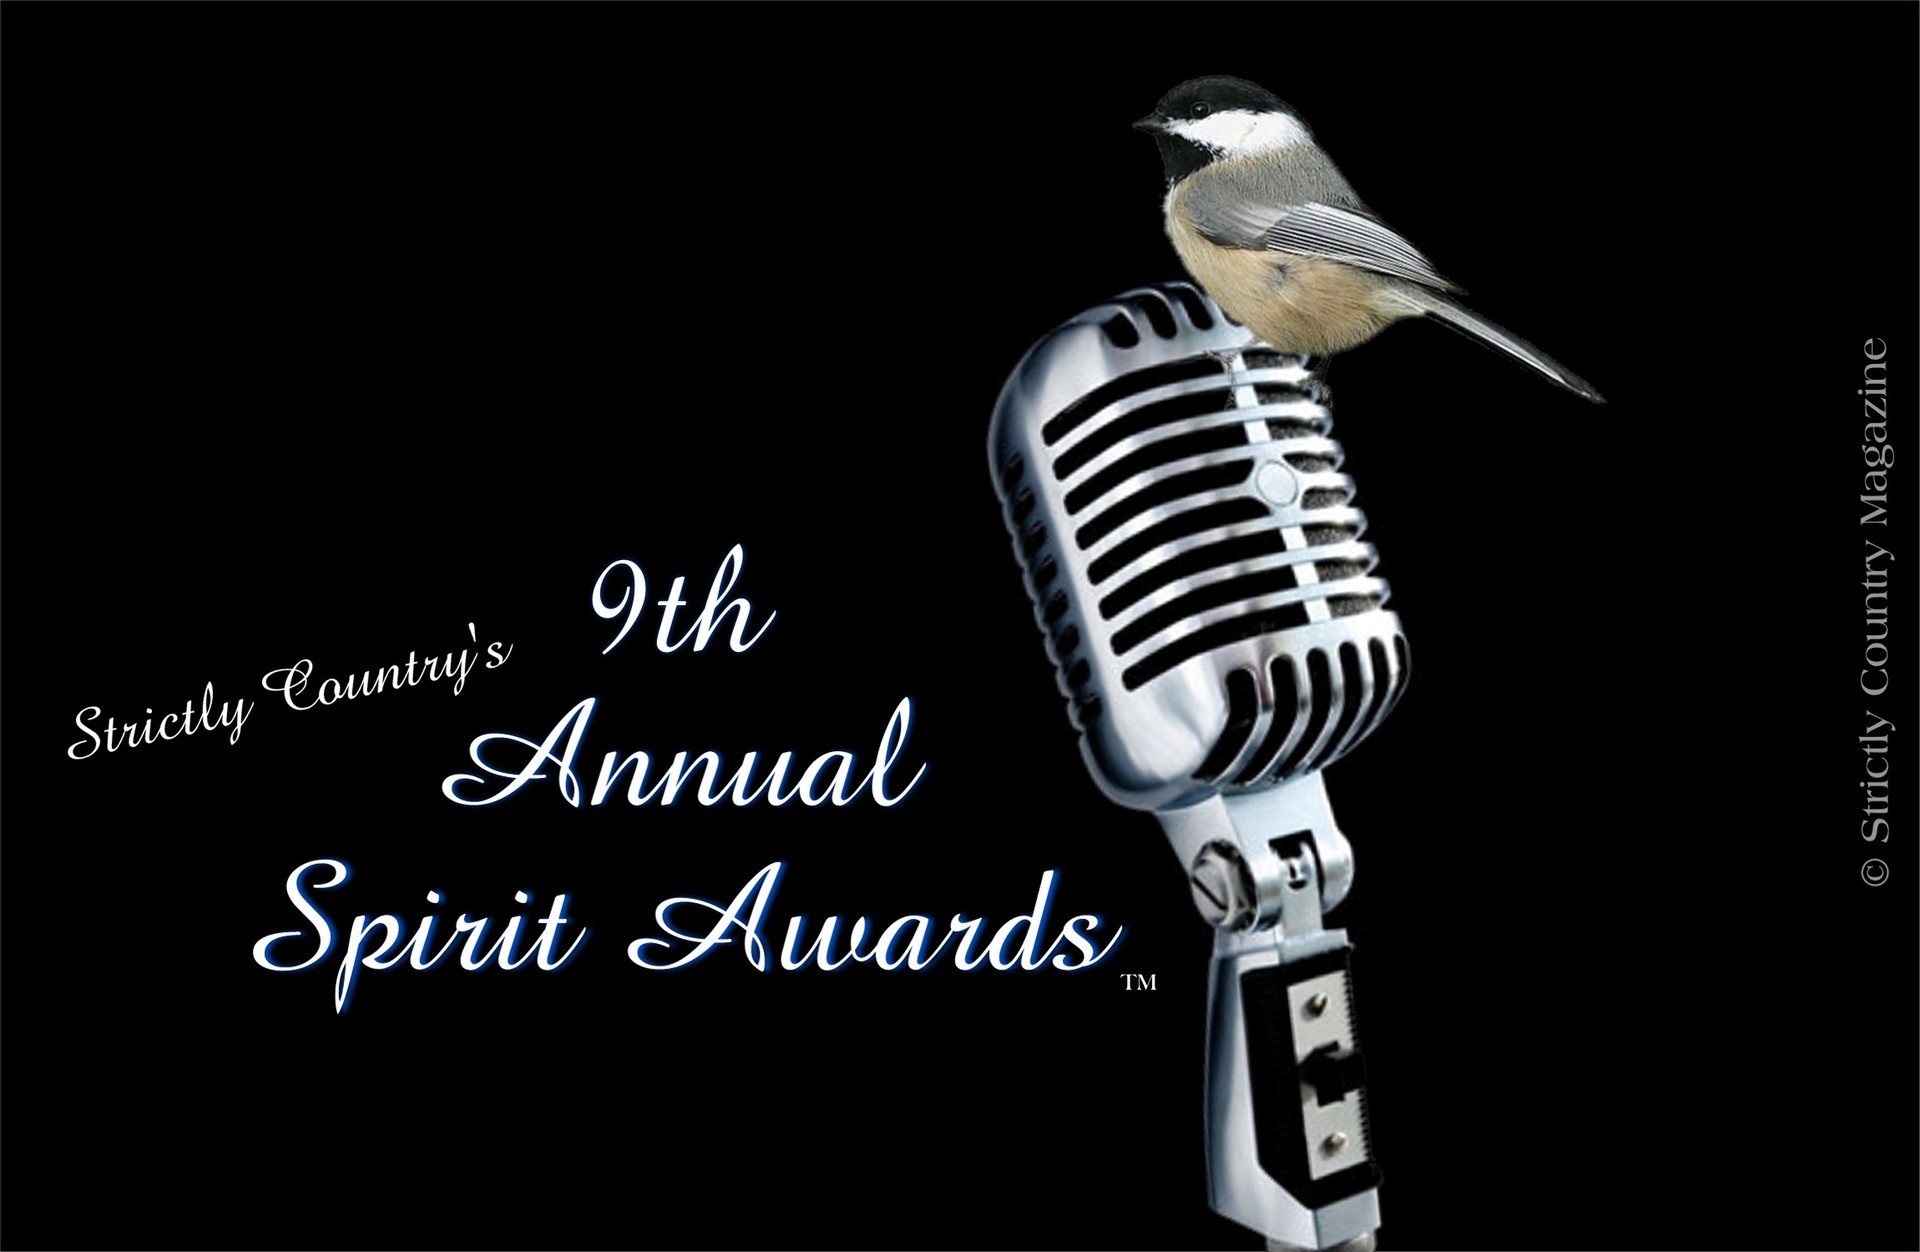 Strictly Country Magazine copyright 9th Annual Spirit Awards official logo